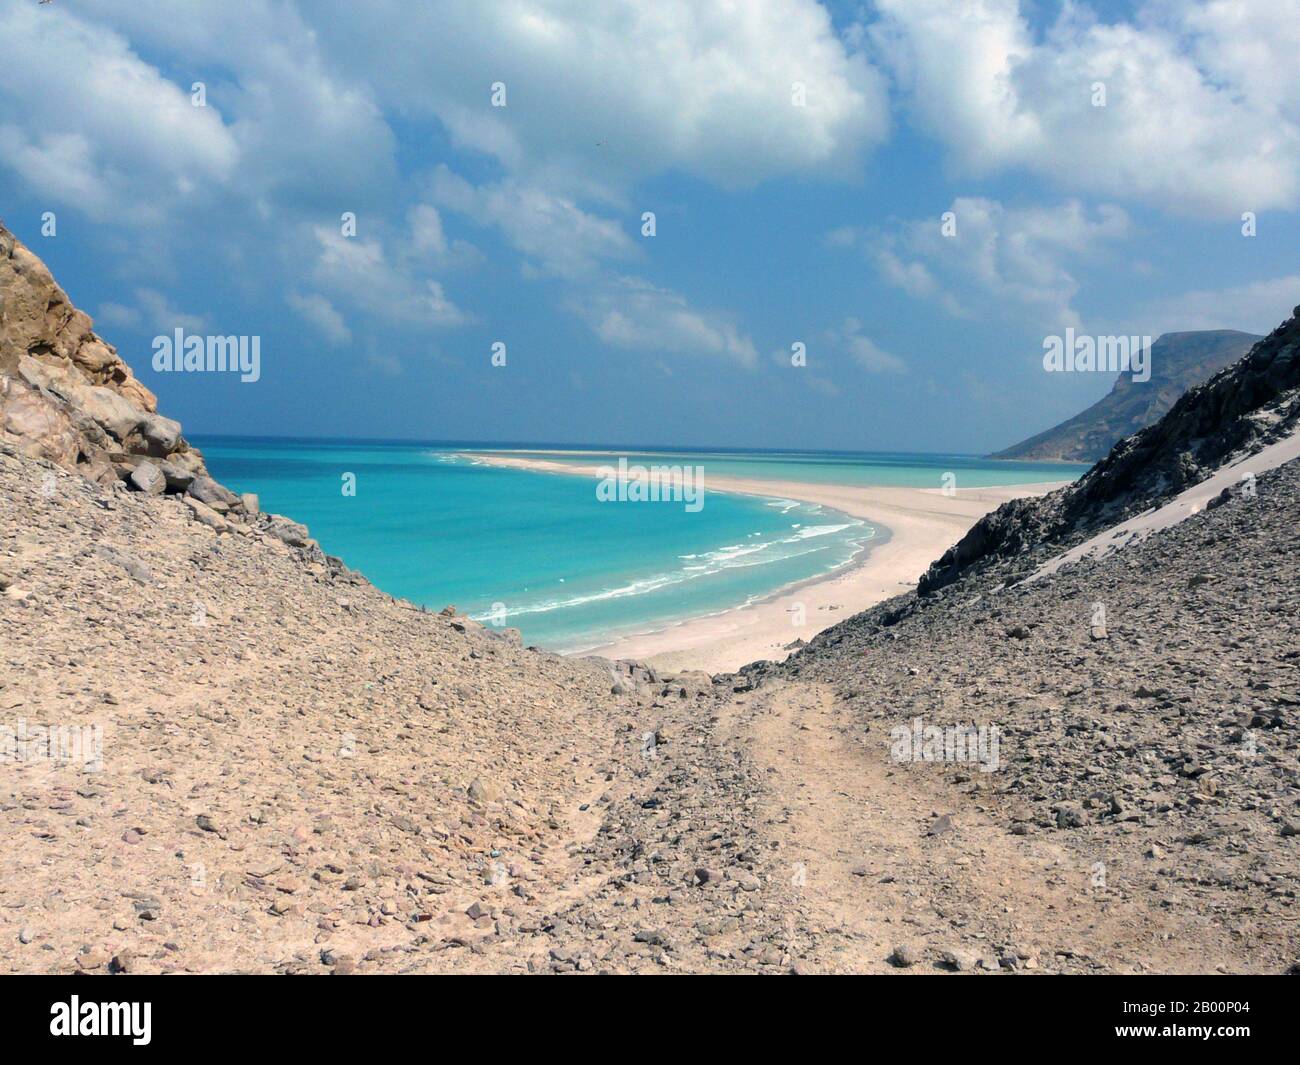 Yemen: Socotra Island (Suqutra Island), beach at Qlinsia, West of island.  Socotra, also spelt Soqotra, is a small archipelago of four islands in the Indian Ocean. The largest island, also called Socotra, is about 95% of the landmass of the archipelago. It lies some 240 km (150 mi) east of the Horn of Africa and 380 km (240 mi) south of the Arabian Peninsula. The island is very isolated and through the process of speciation, a third of its plant life is found nowhere else on the planet. It has been described as the most alien-looking place on Earth. Socotra is part of the Republic of Yemen. Stock Photo